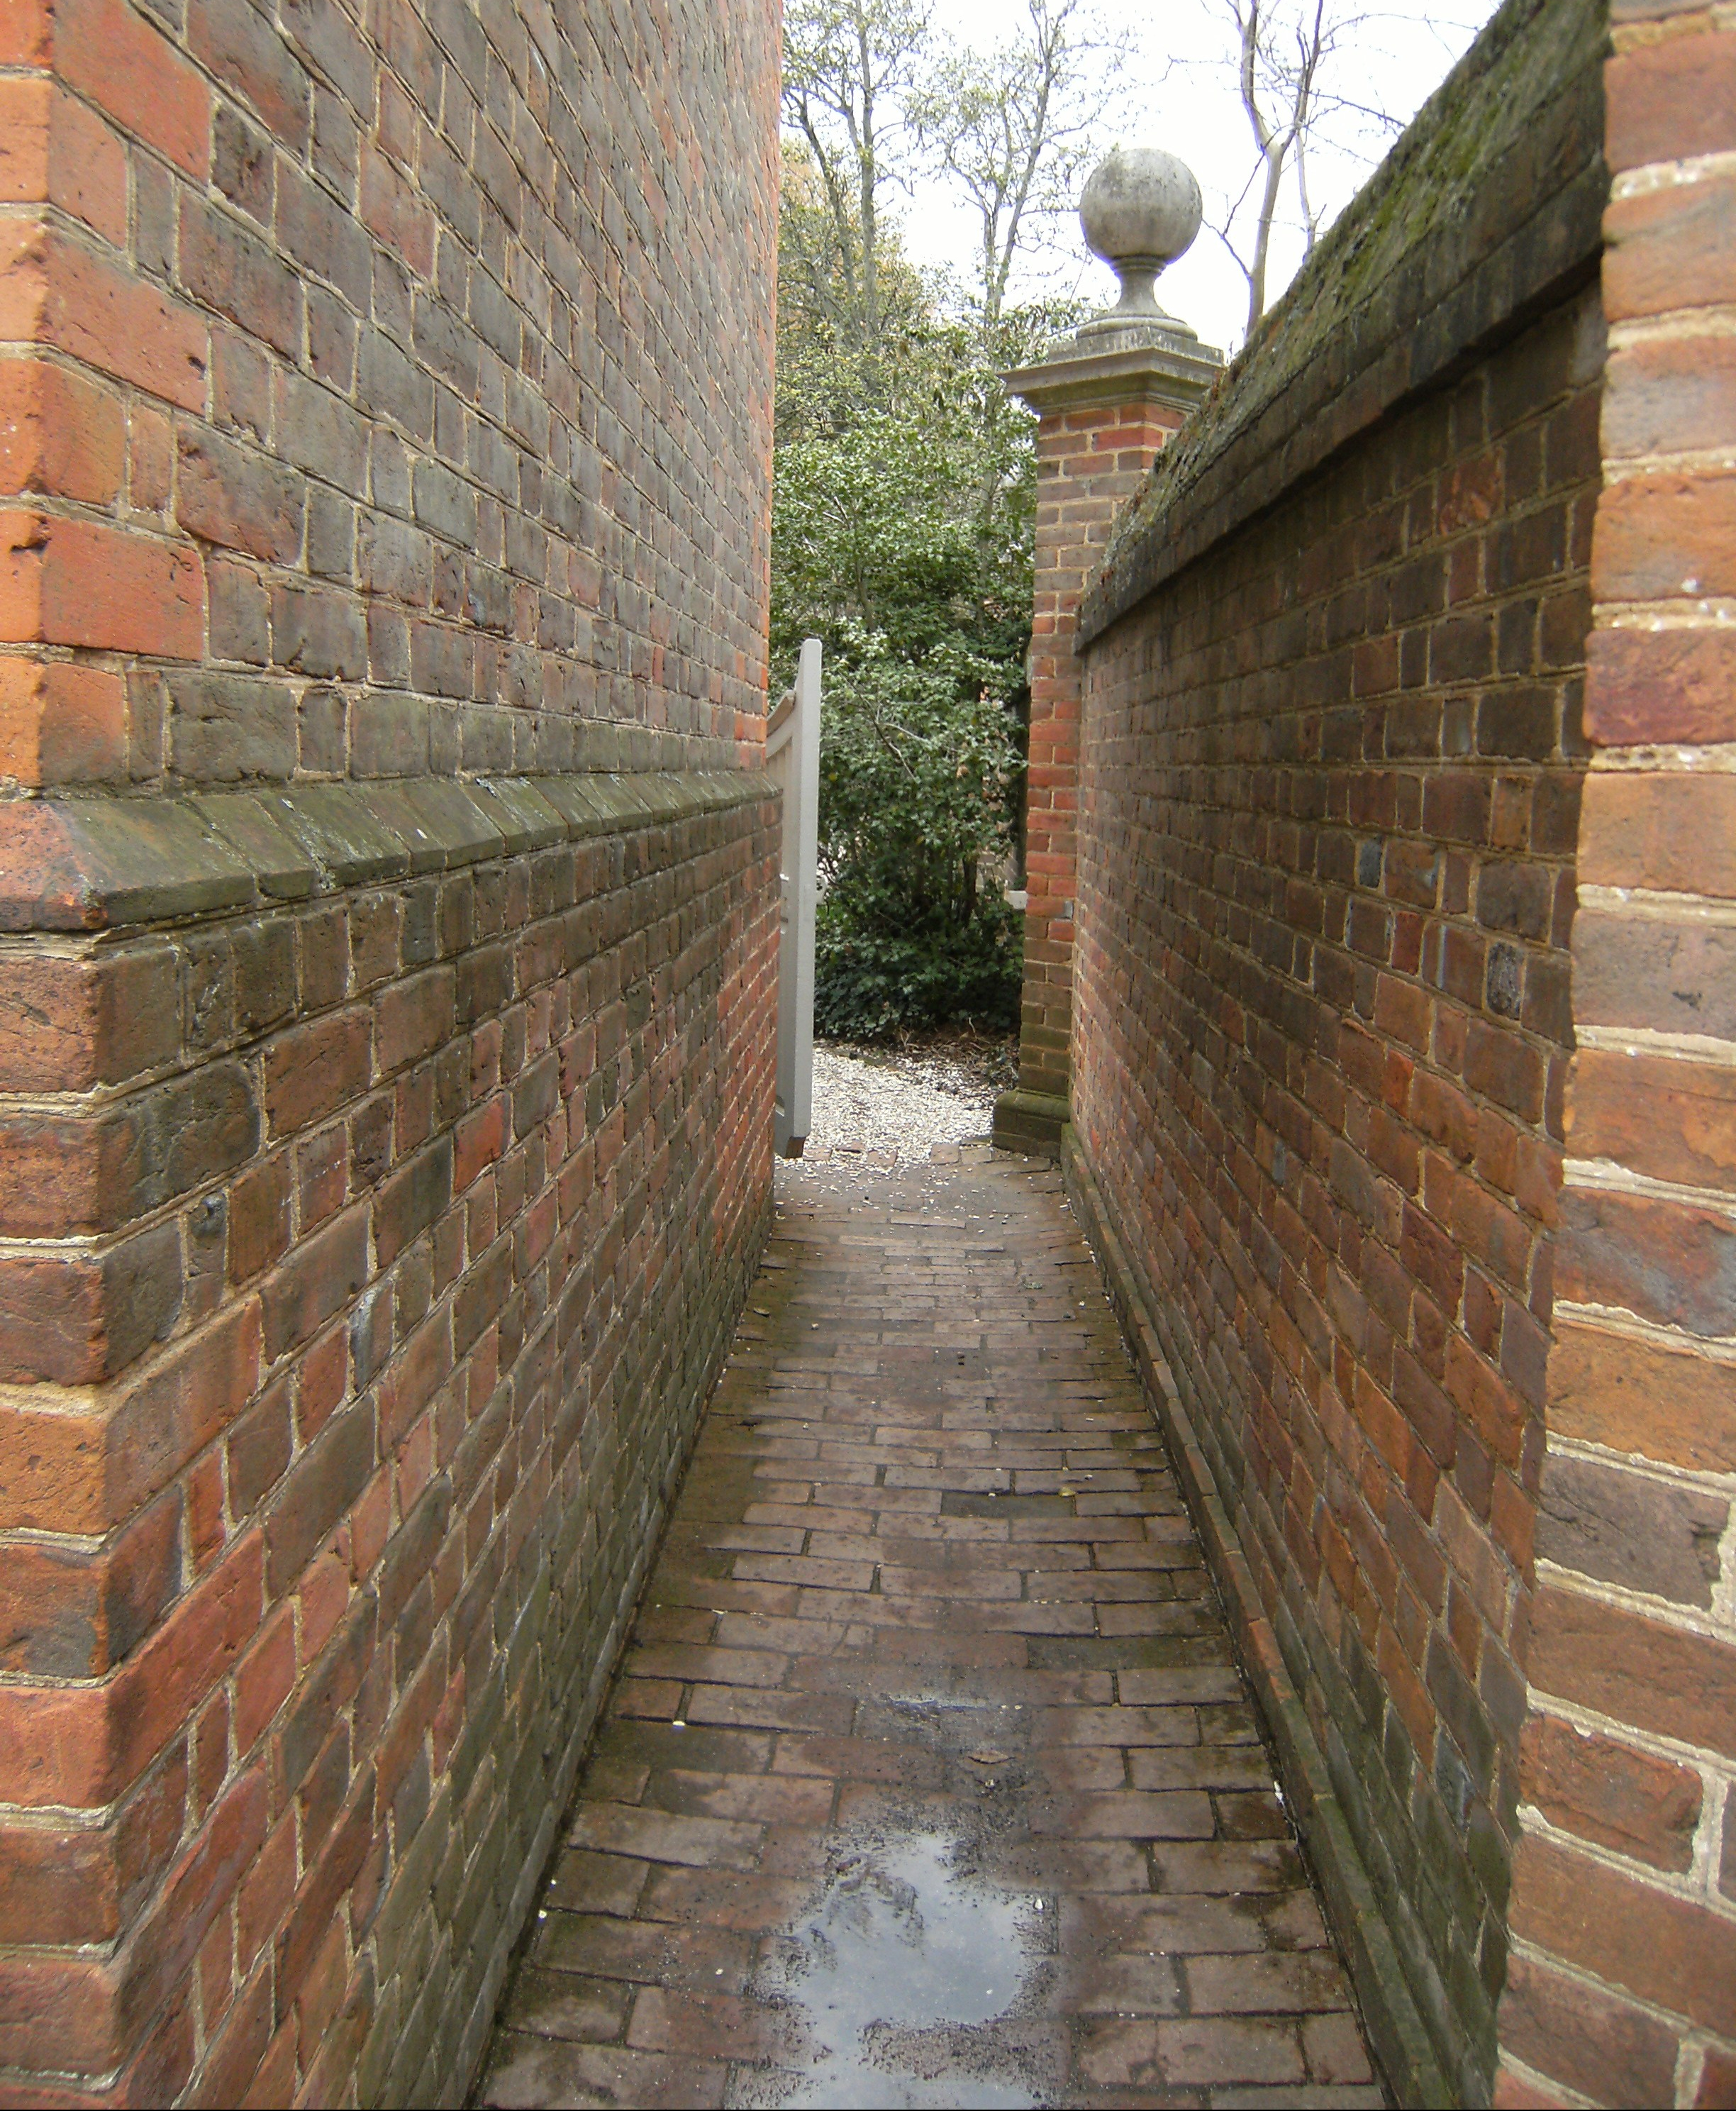 A brick wall stretches to the garden gate